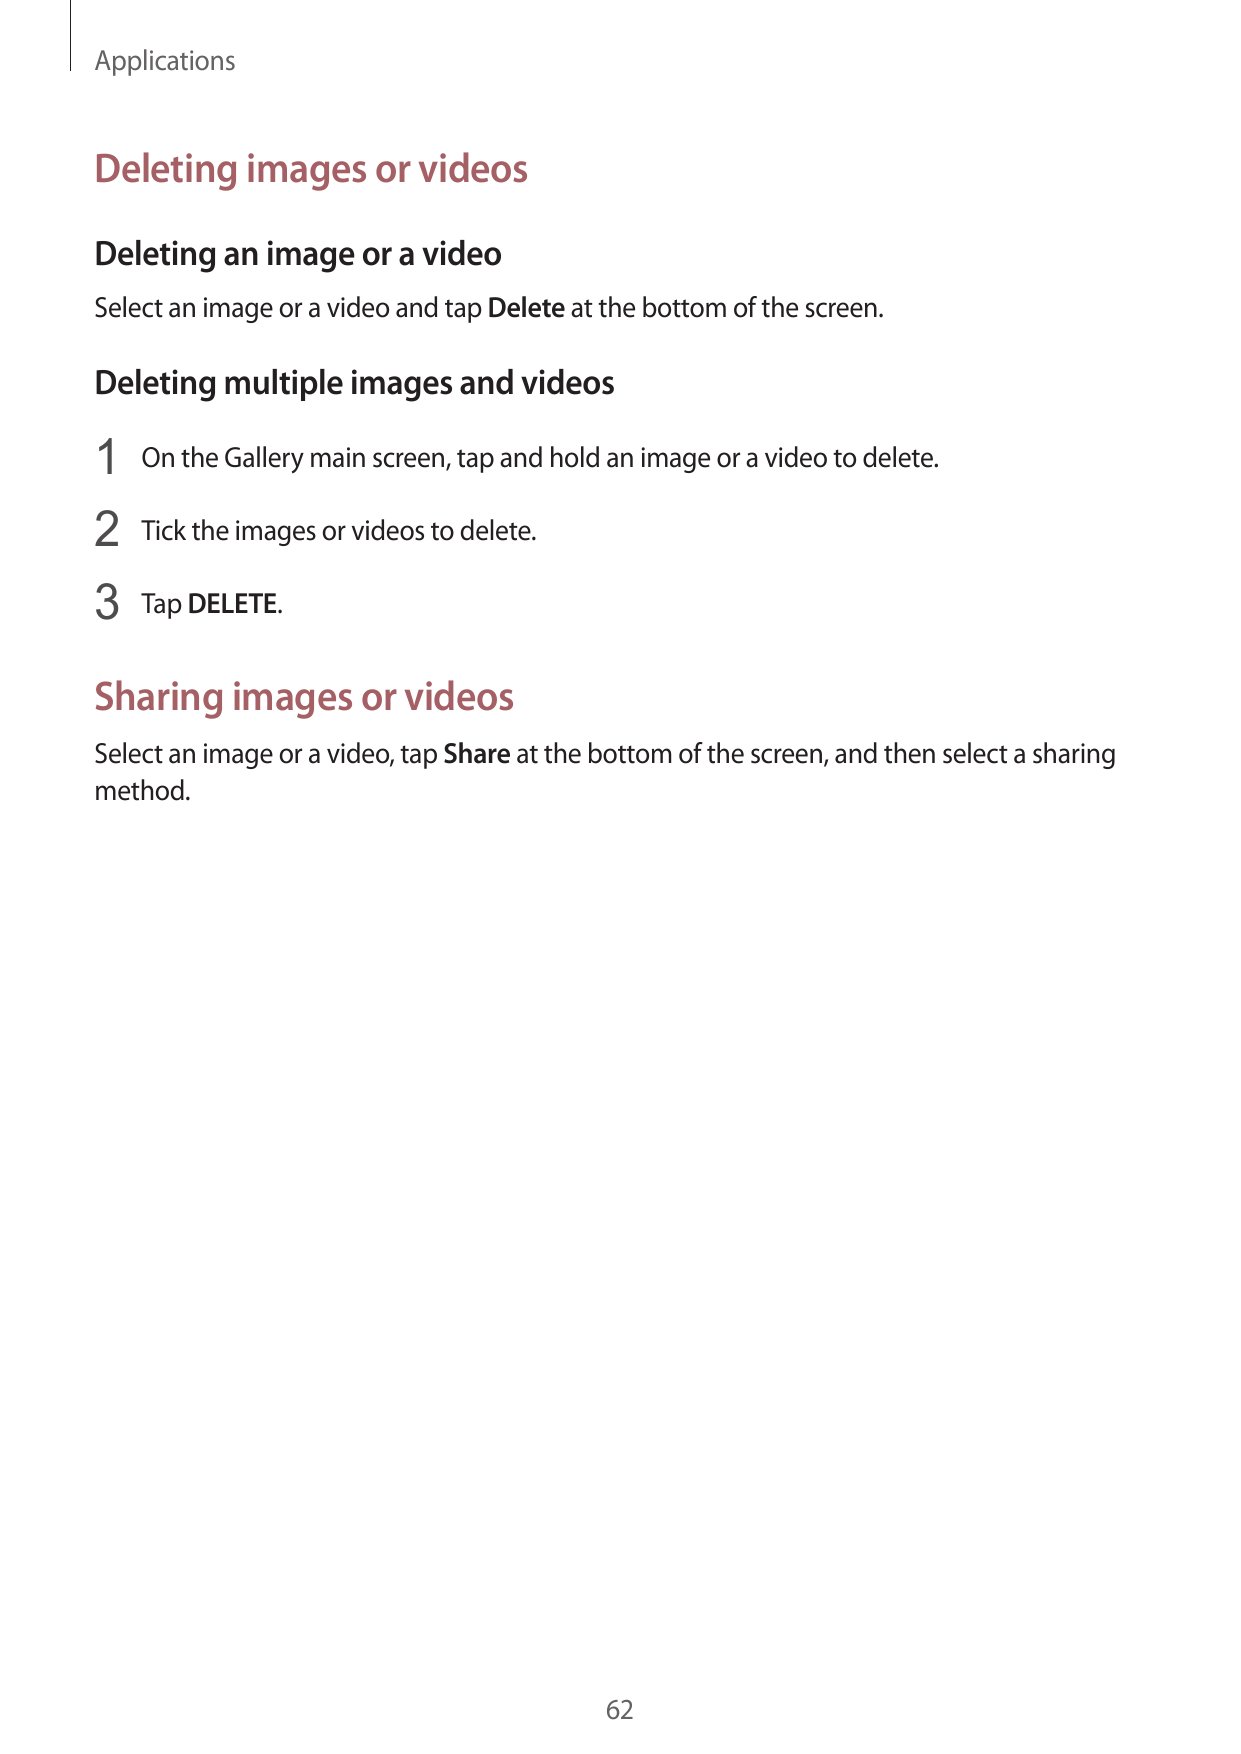 ApplicationsDeleting images or videosDeleting an image or a videoSelect an image or a video and tap Delete at the bottom of the 